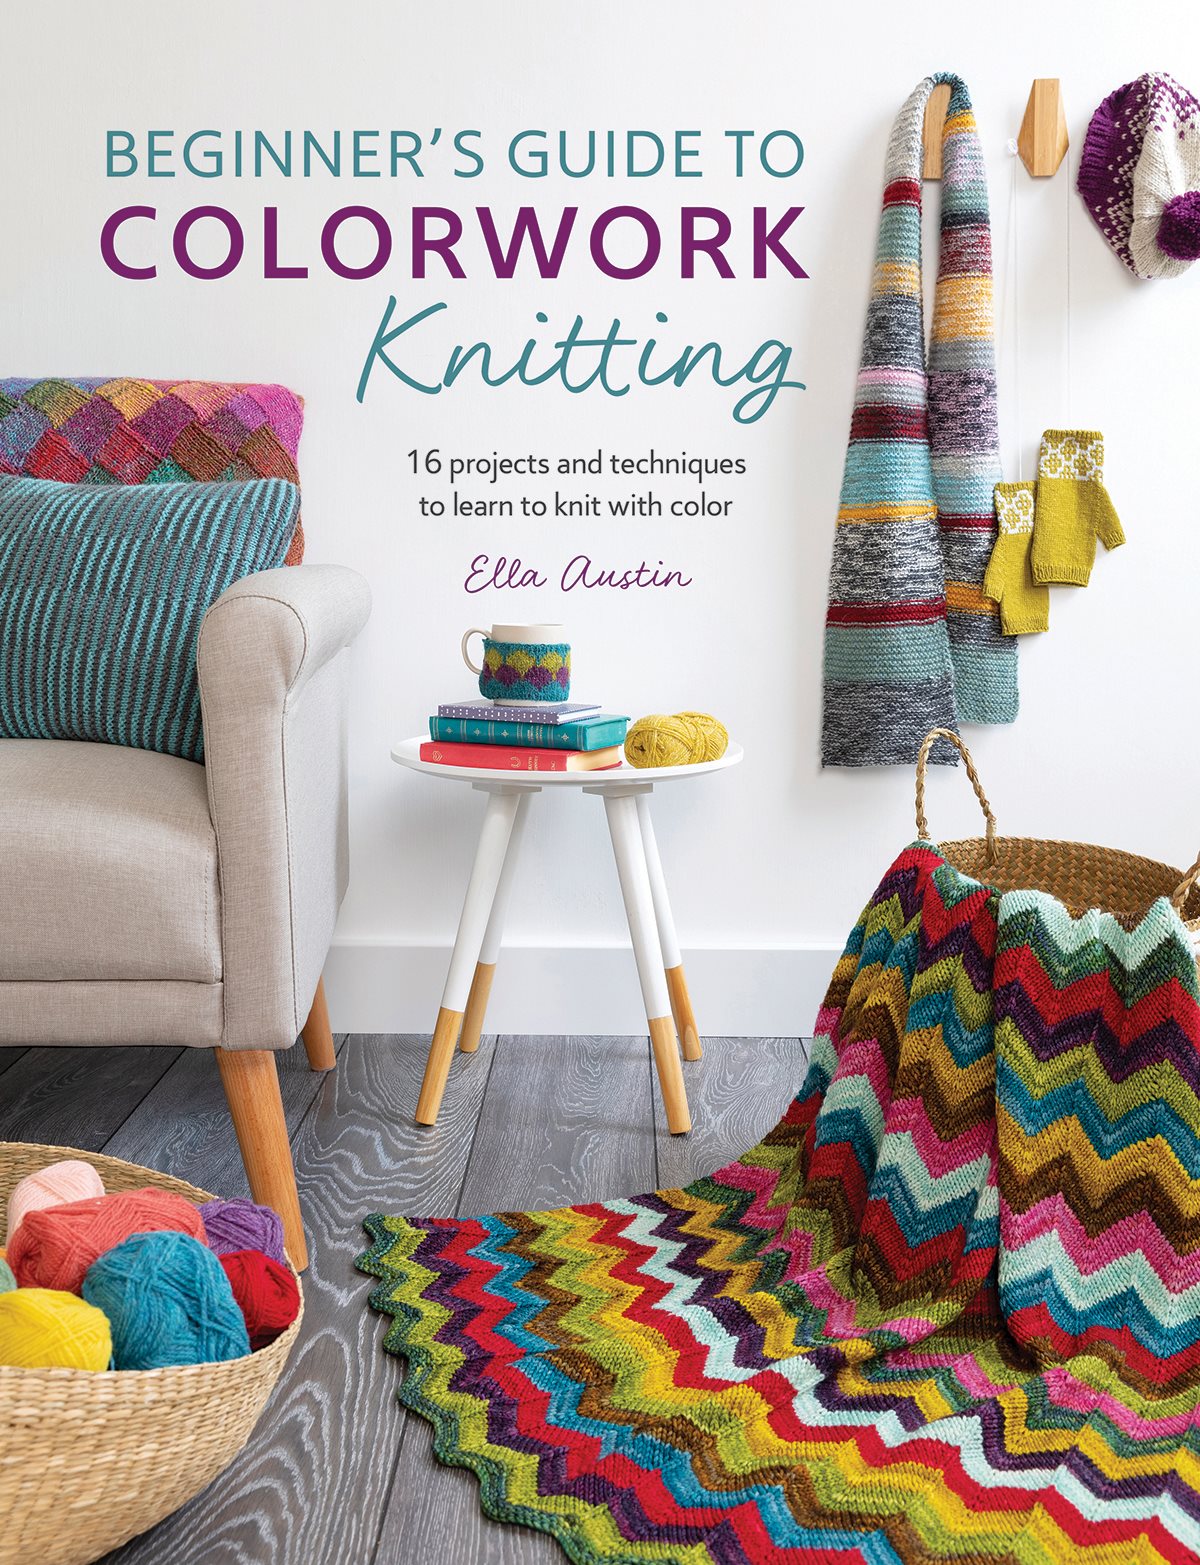 Beginners Guide to Colorwork Knitting 16 Projects and Techniques to Learn to Knit with Color - image 1